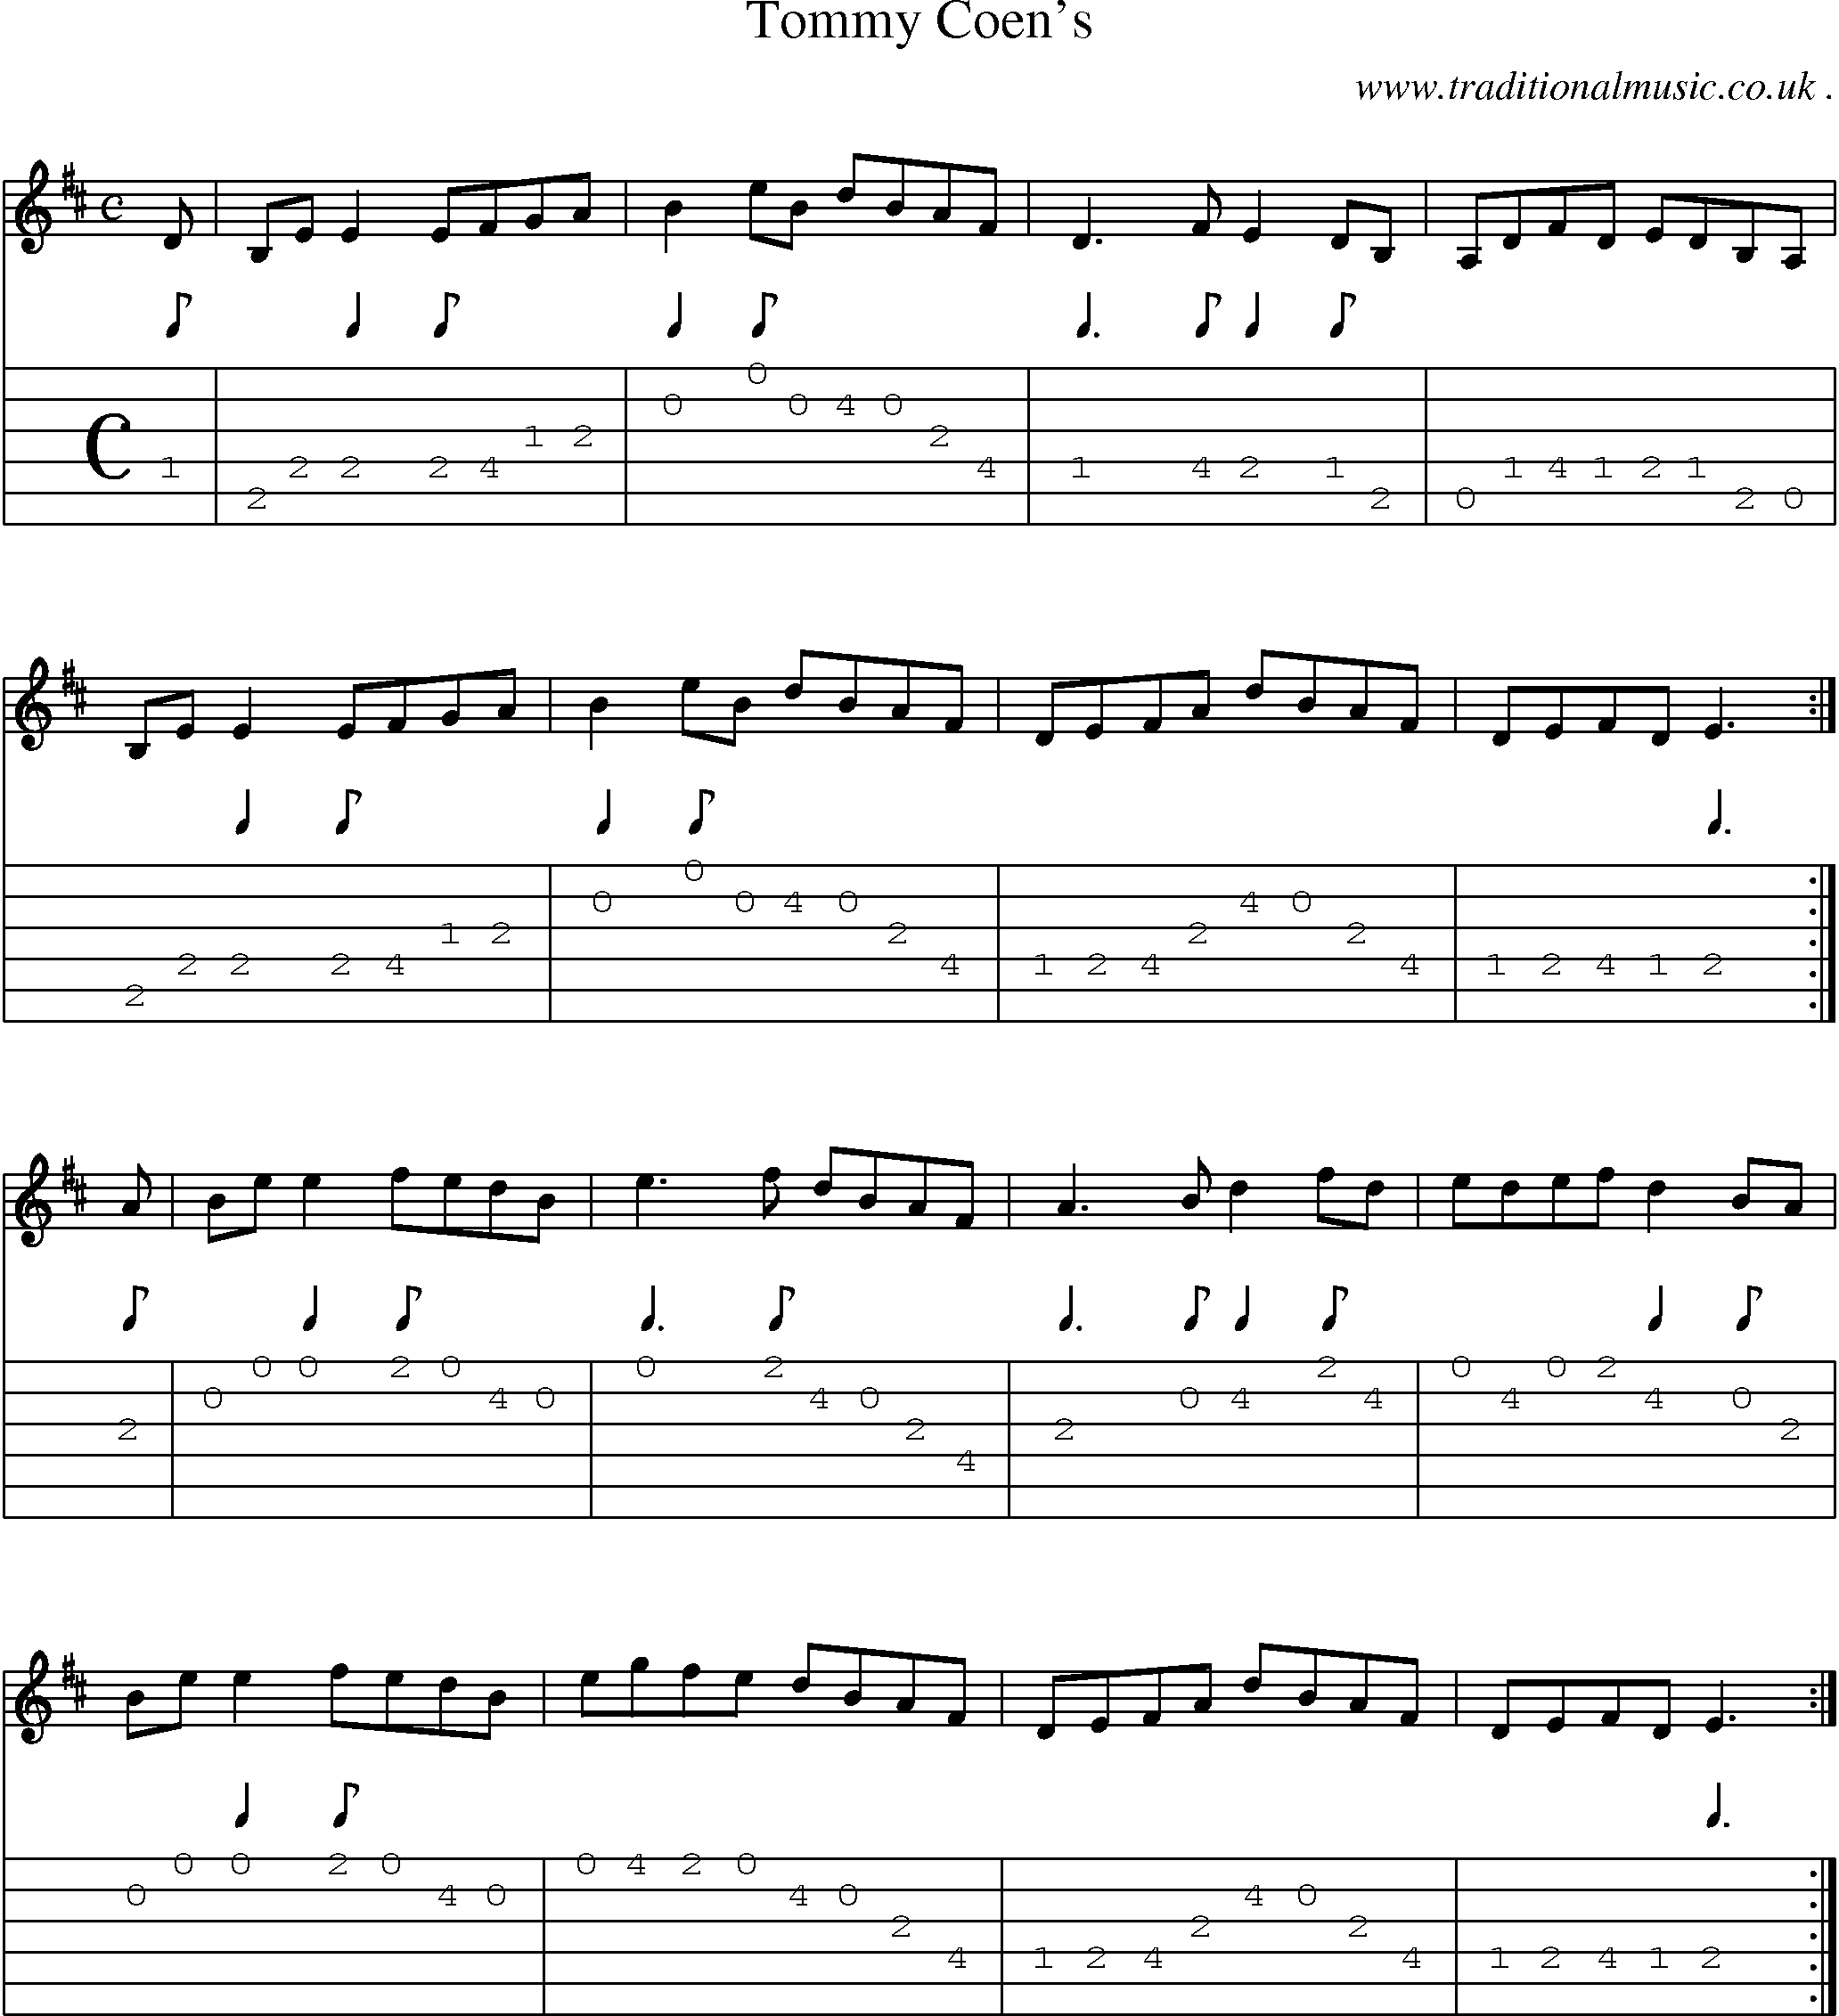 Sheet-Music and Guitar Tabs for Tommy Coens